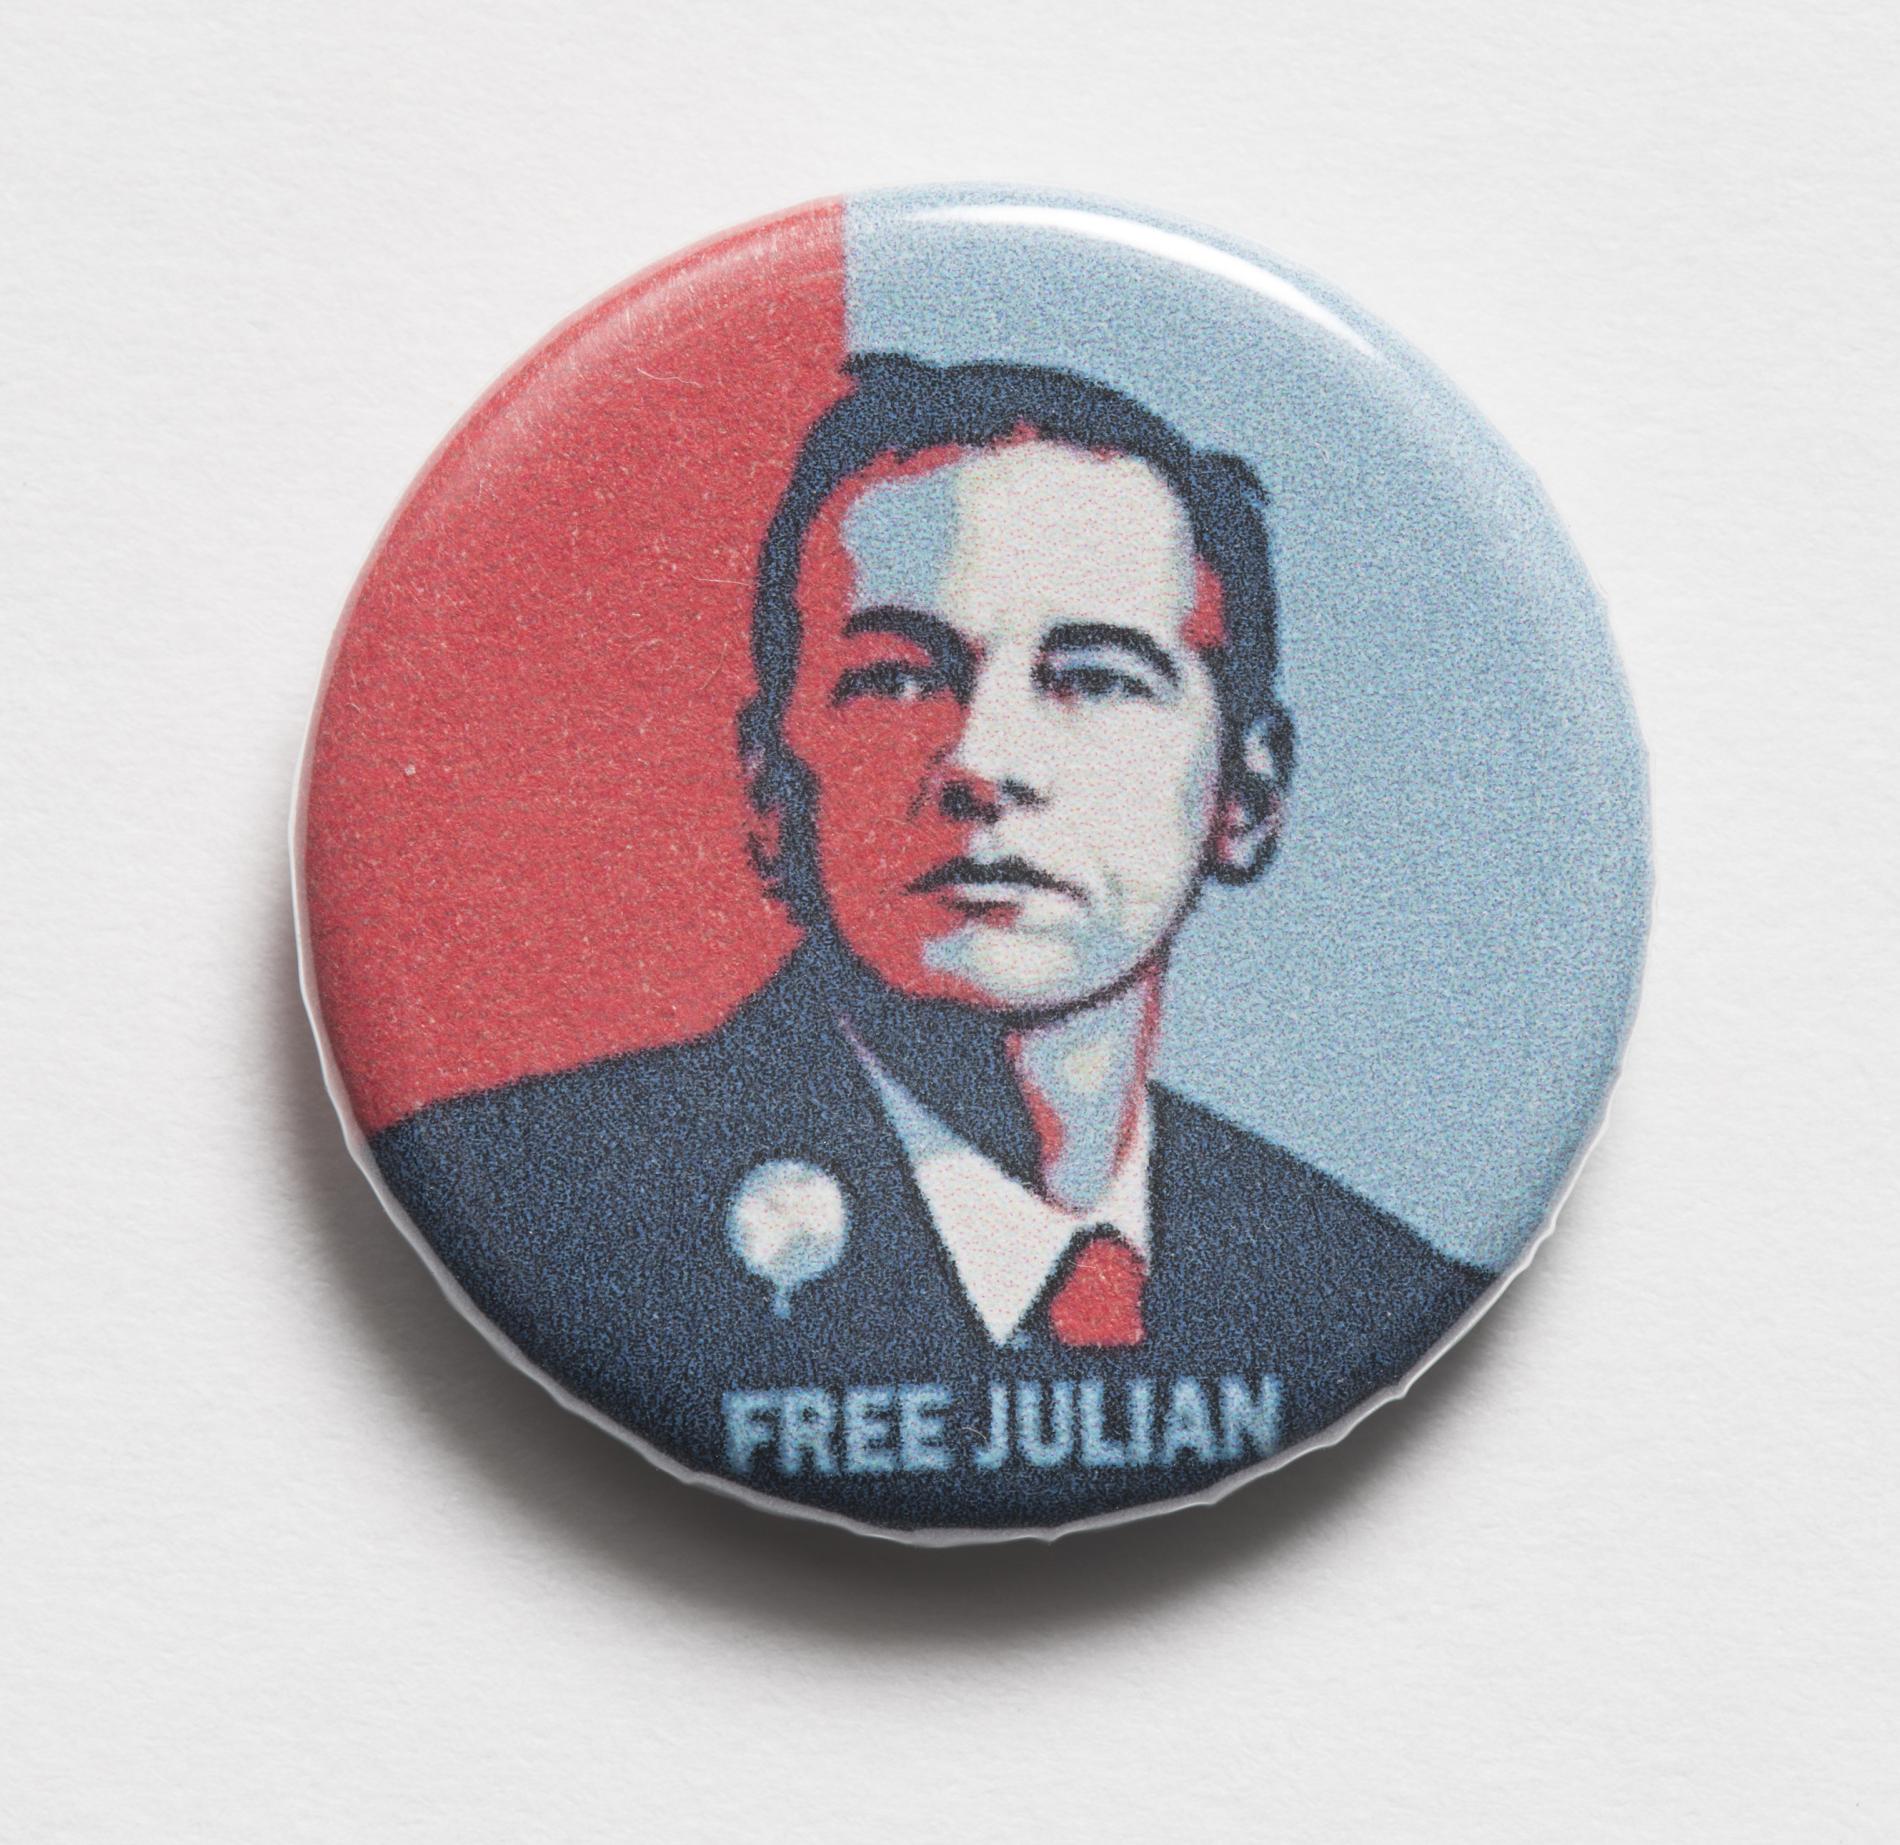 Photograph of a small badge labled "Free Julian"